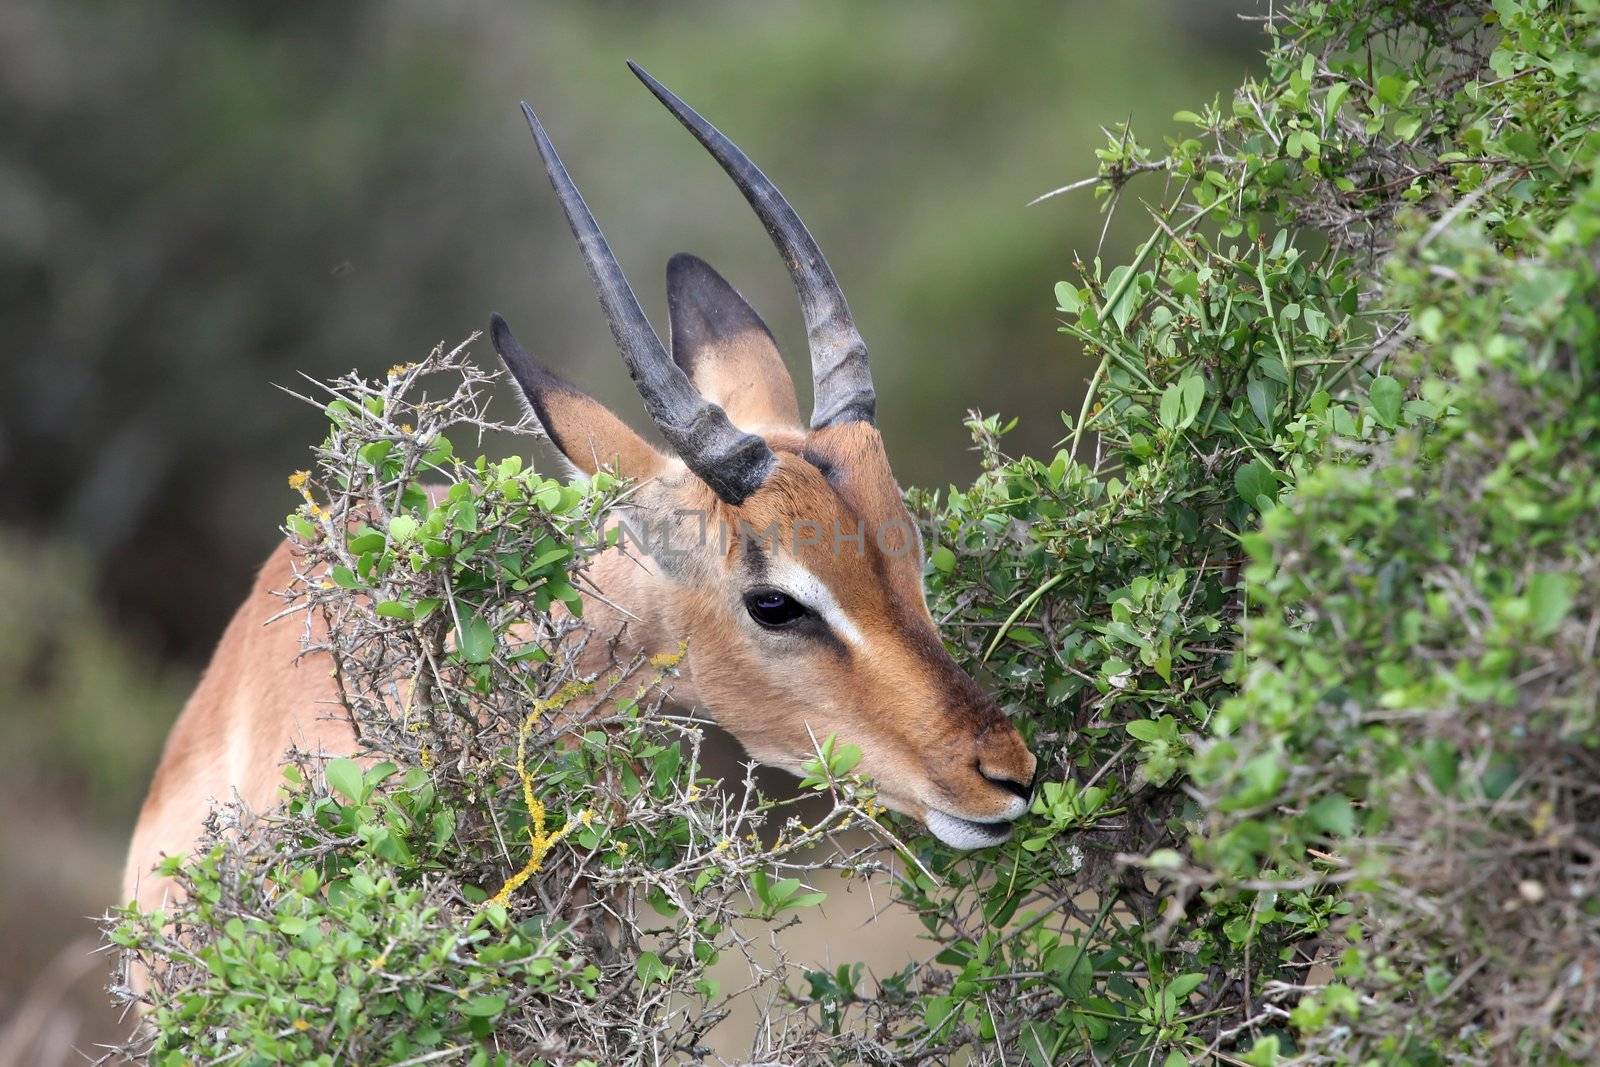 Young Impala ram reaching for succulent green leaves on a tree